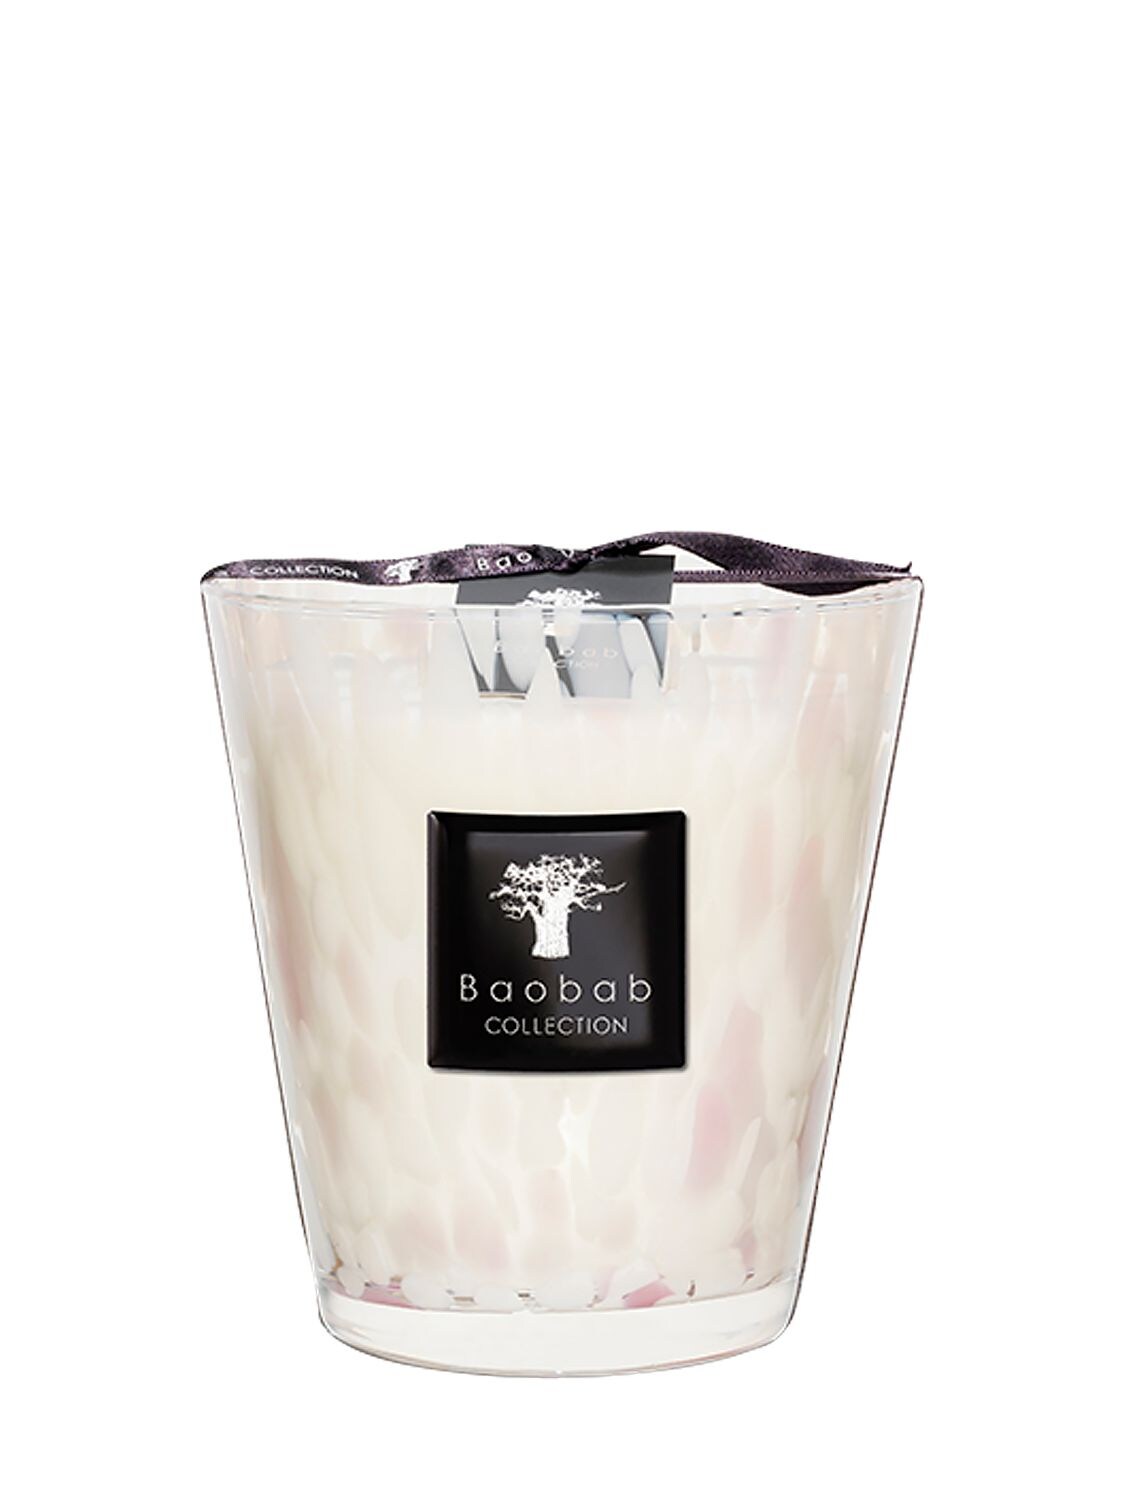 Baobab Collection 1.1kg White Pearls Candle In Transparent